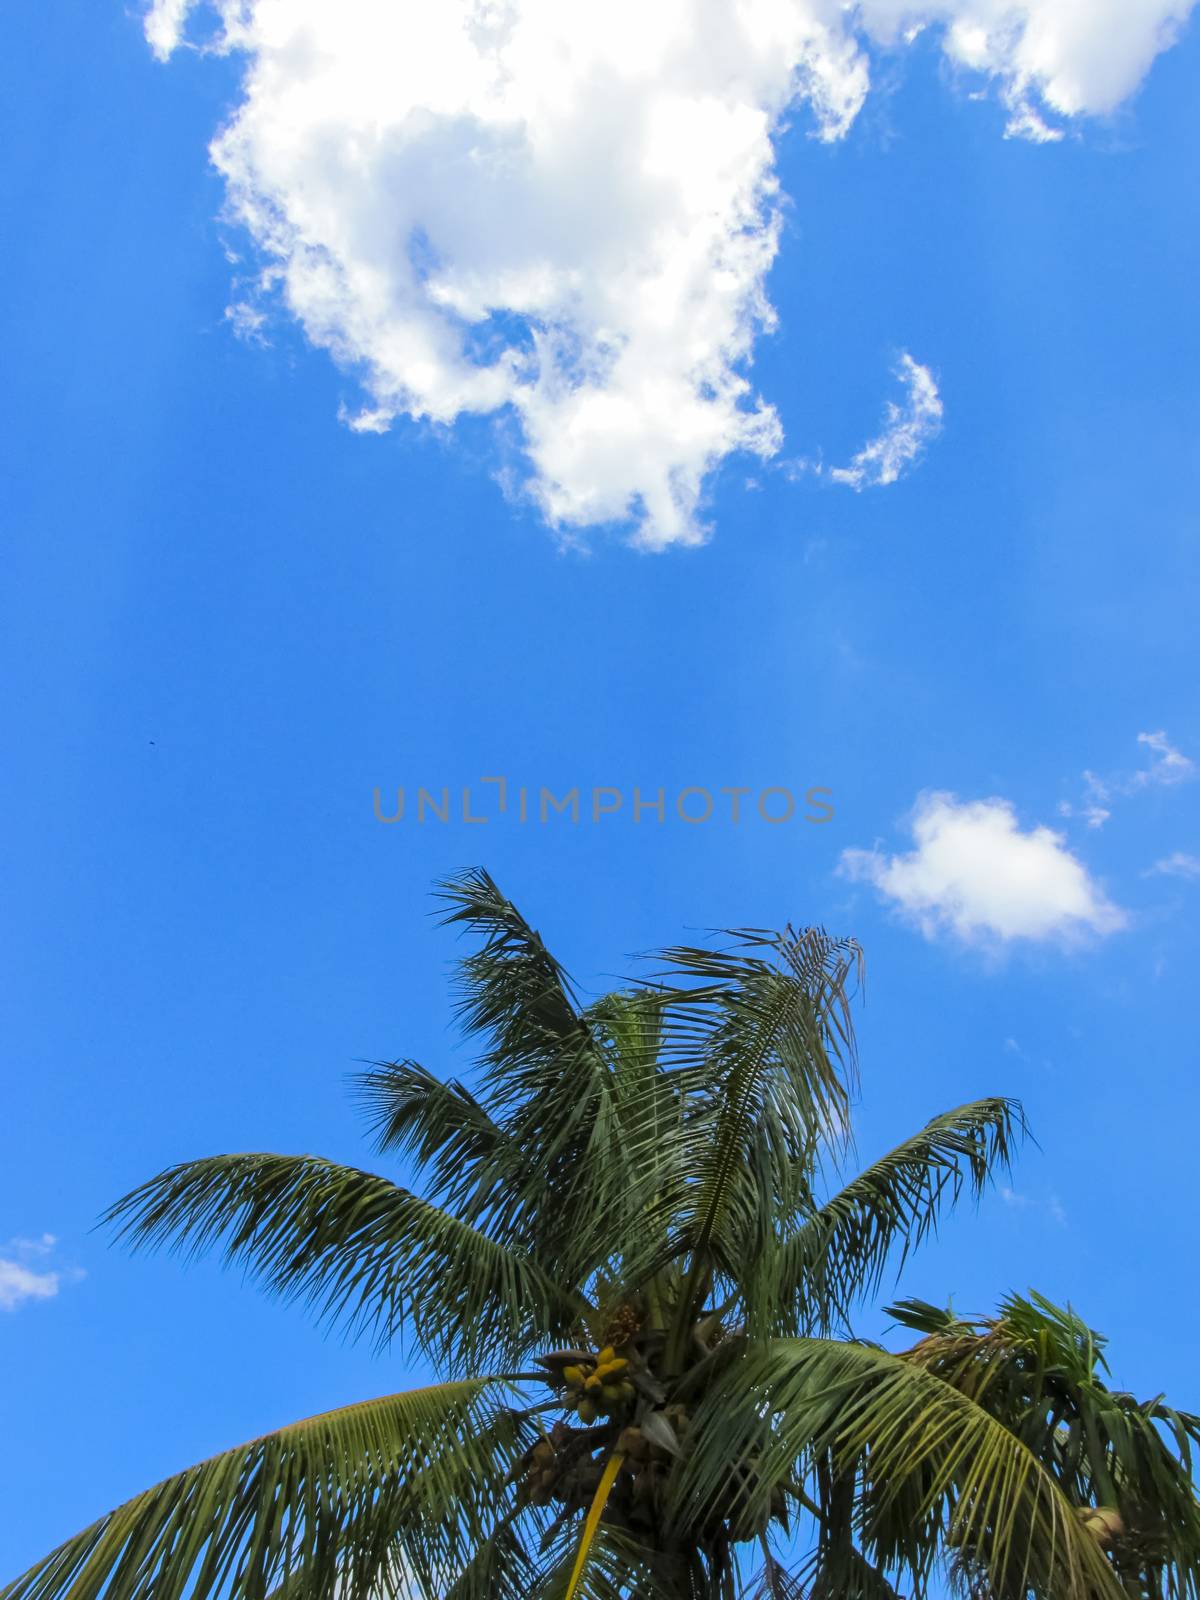 Pre Monsoon clouds started to come visible over teh coconut tree.